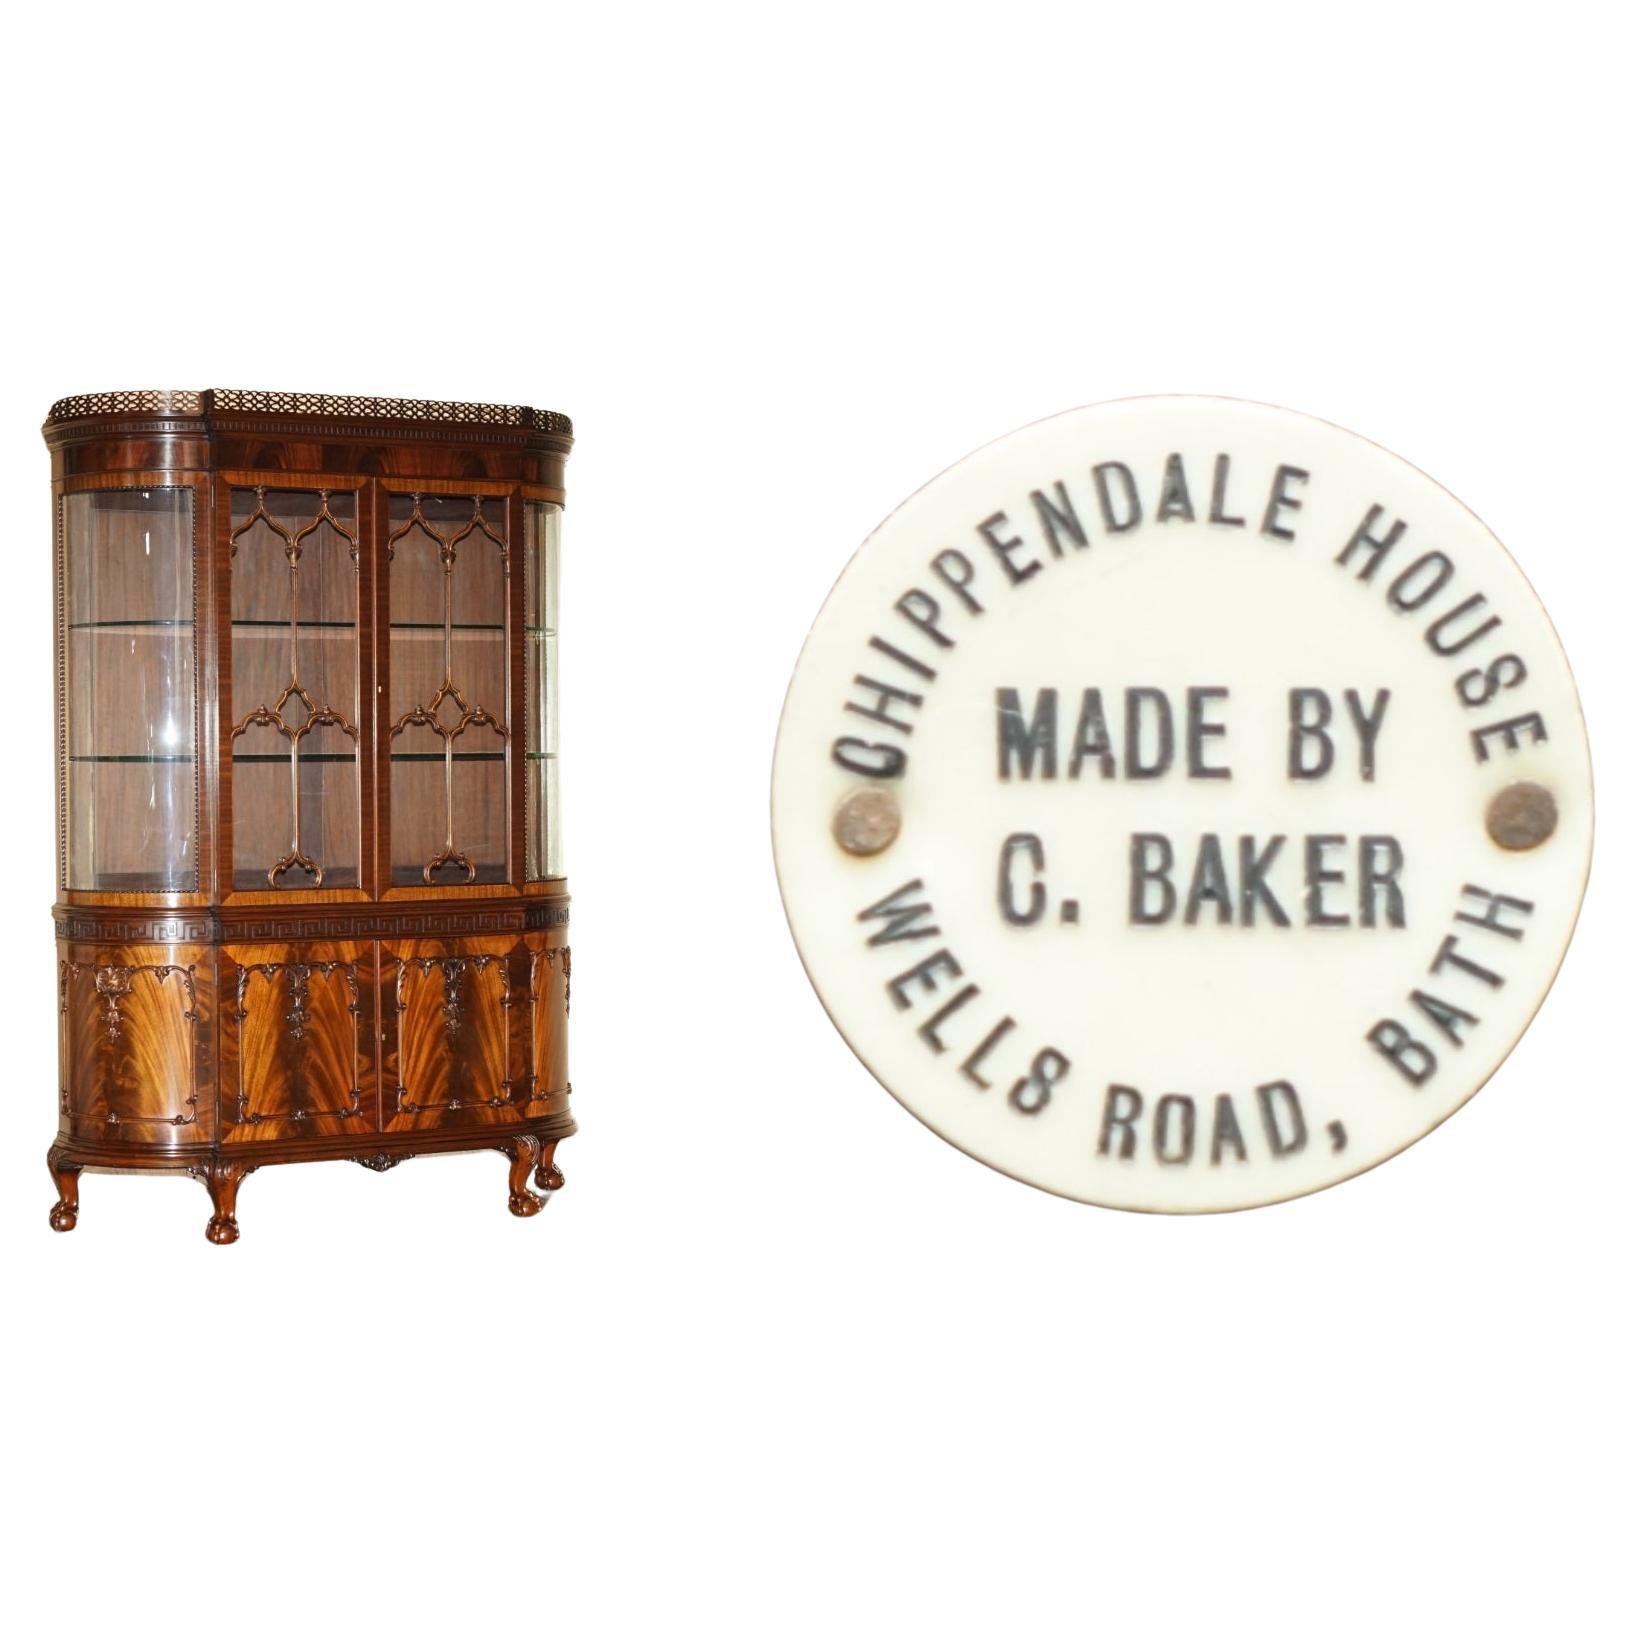 Exquisite ANTIQUE CHARLES BAker OF CHIPPENDALE HOUSE STAMPED DISPLAY CABINET im Angebot